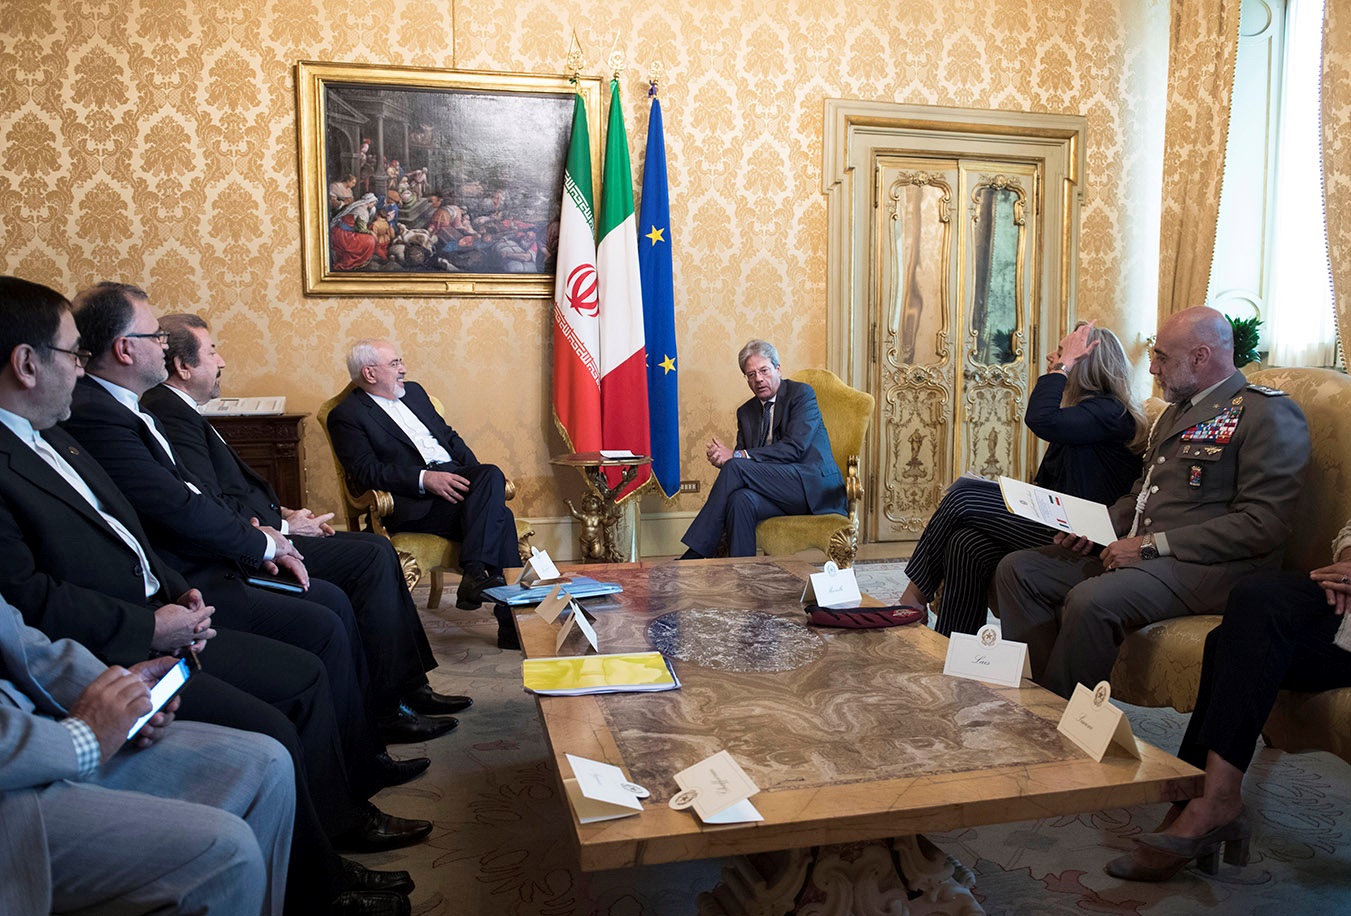 Italian Foreign Minister Angelino Alfano meets with his Iranian counterpart Mohammad Javad Zarif